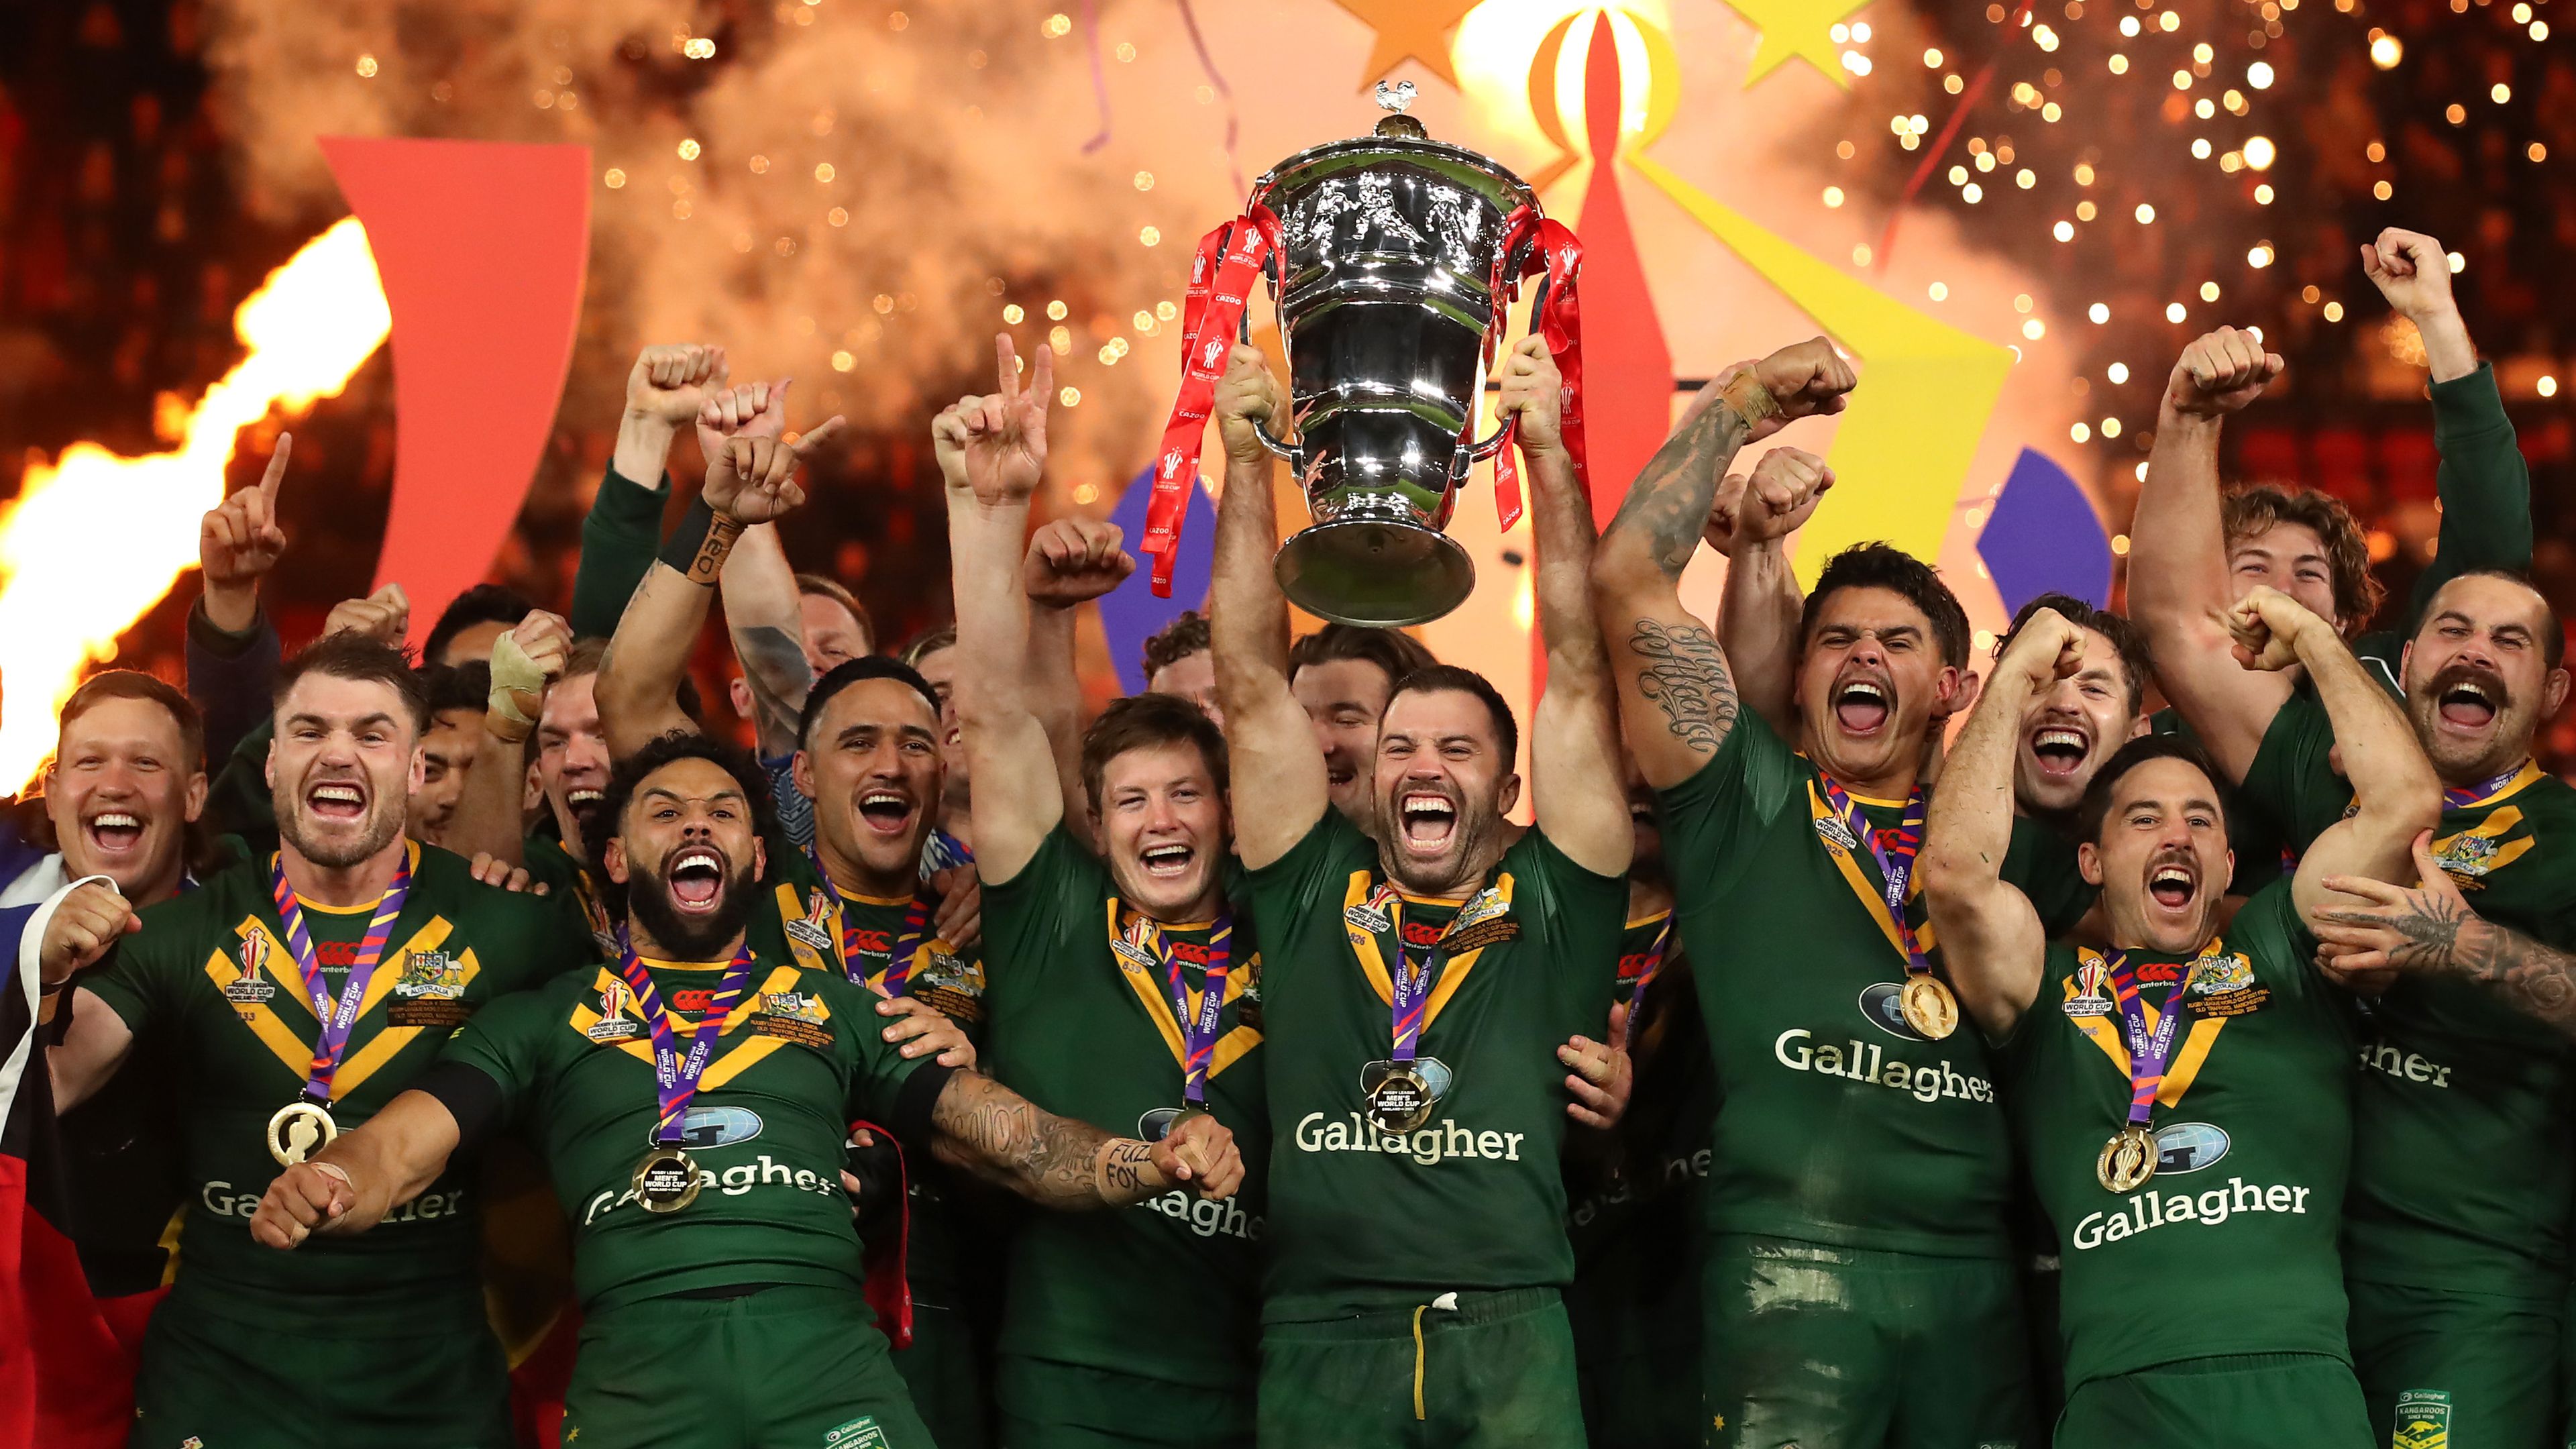 MANCHESTER, ENGLAND - NOVEMBER 19: James Tedesco of Australia lifts the Rugby League World Cup trophy with teammates following victory during the Rugby League World Cup Final match between Australia and Samoa at Old Trafford on November 19, 2022 in Manchester, England. (Photo by Jan Kruger/Getty Images for RLWC)